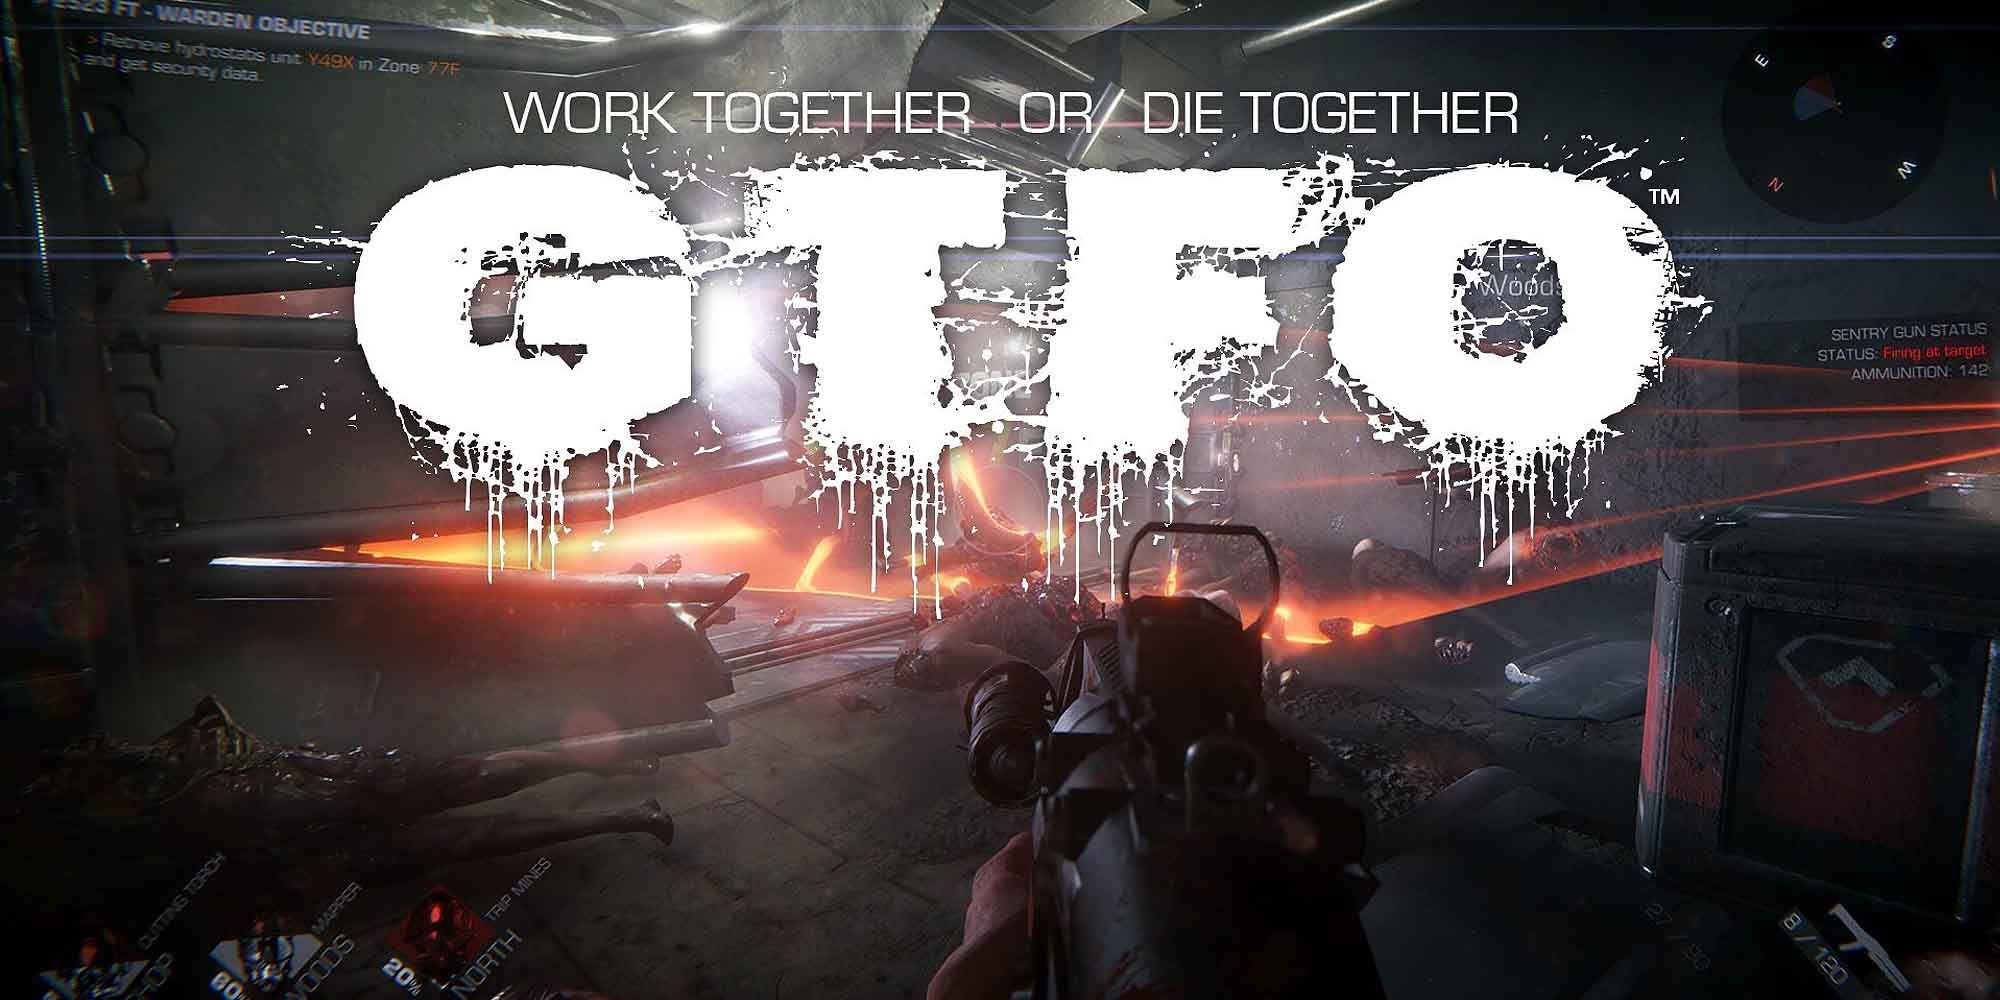 Promotional image for the game GTFO showing the gameplay